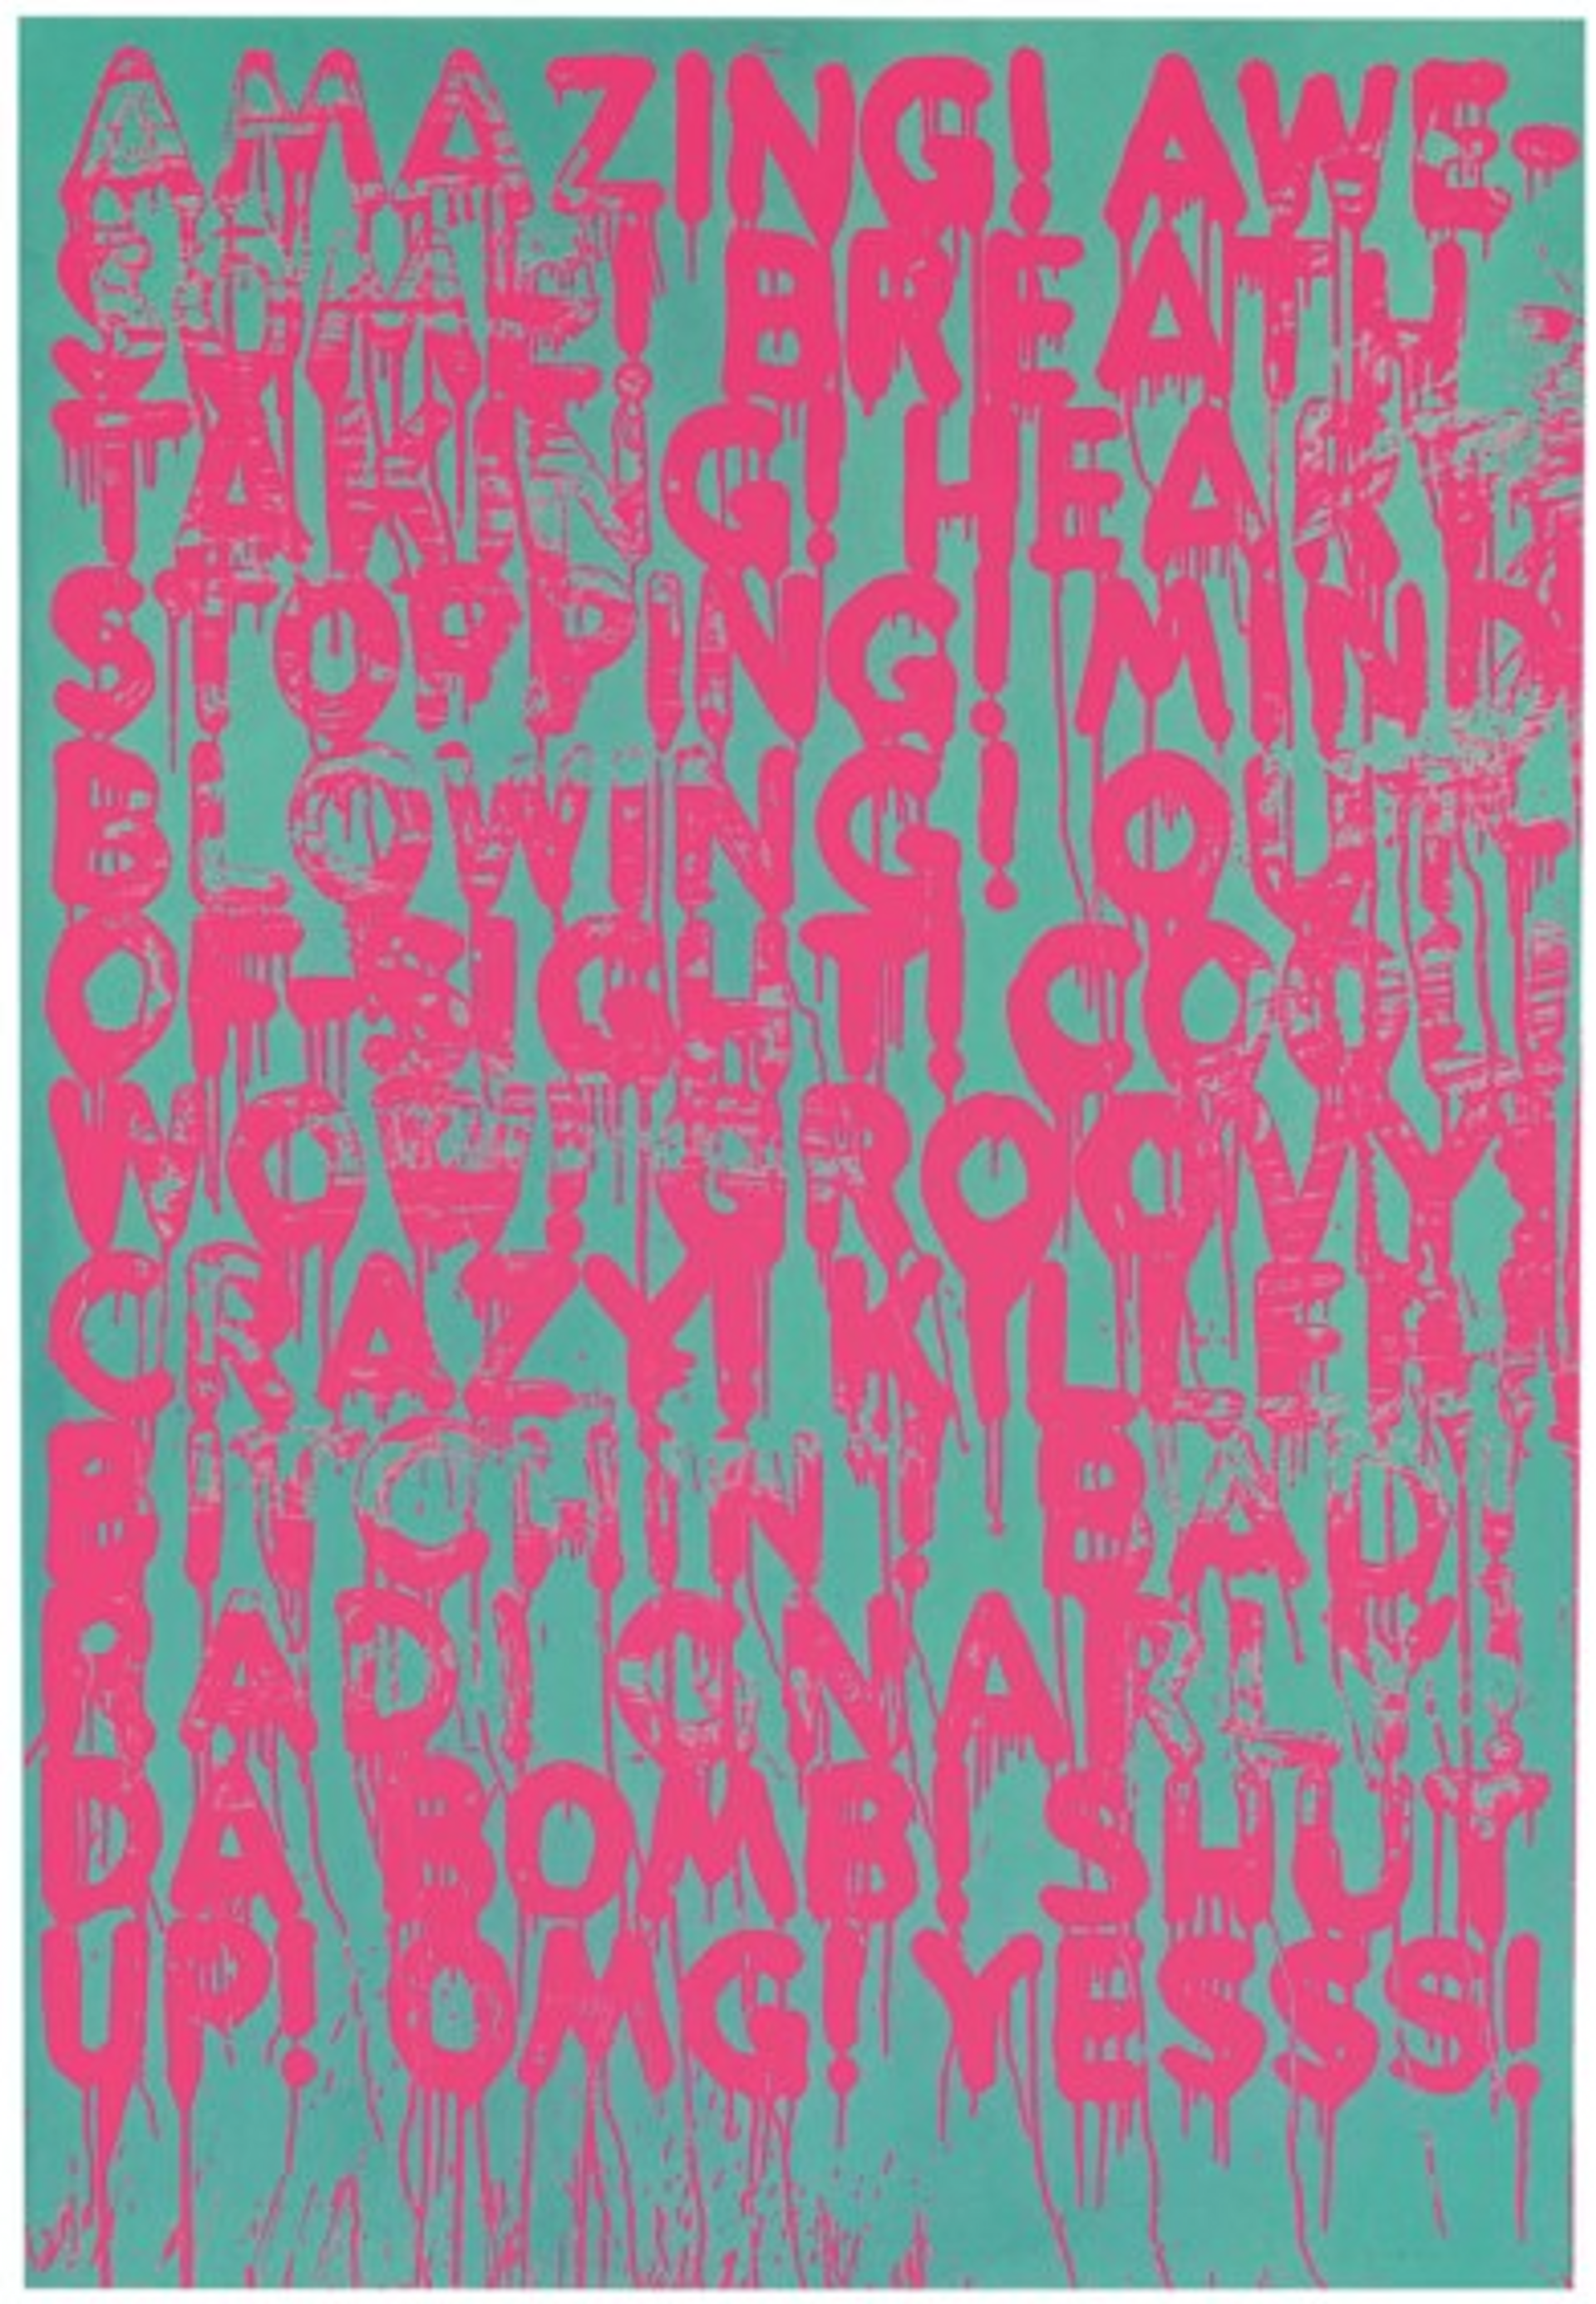 A screenprint with a light blue background featuring vibrant pink bleeded words. The words include positive affirmations such as "Amazing, awesome, breathtaking, mind blowing," and more.